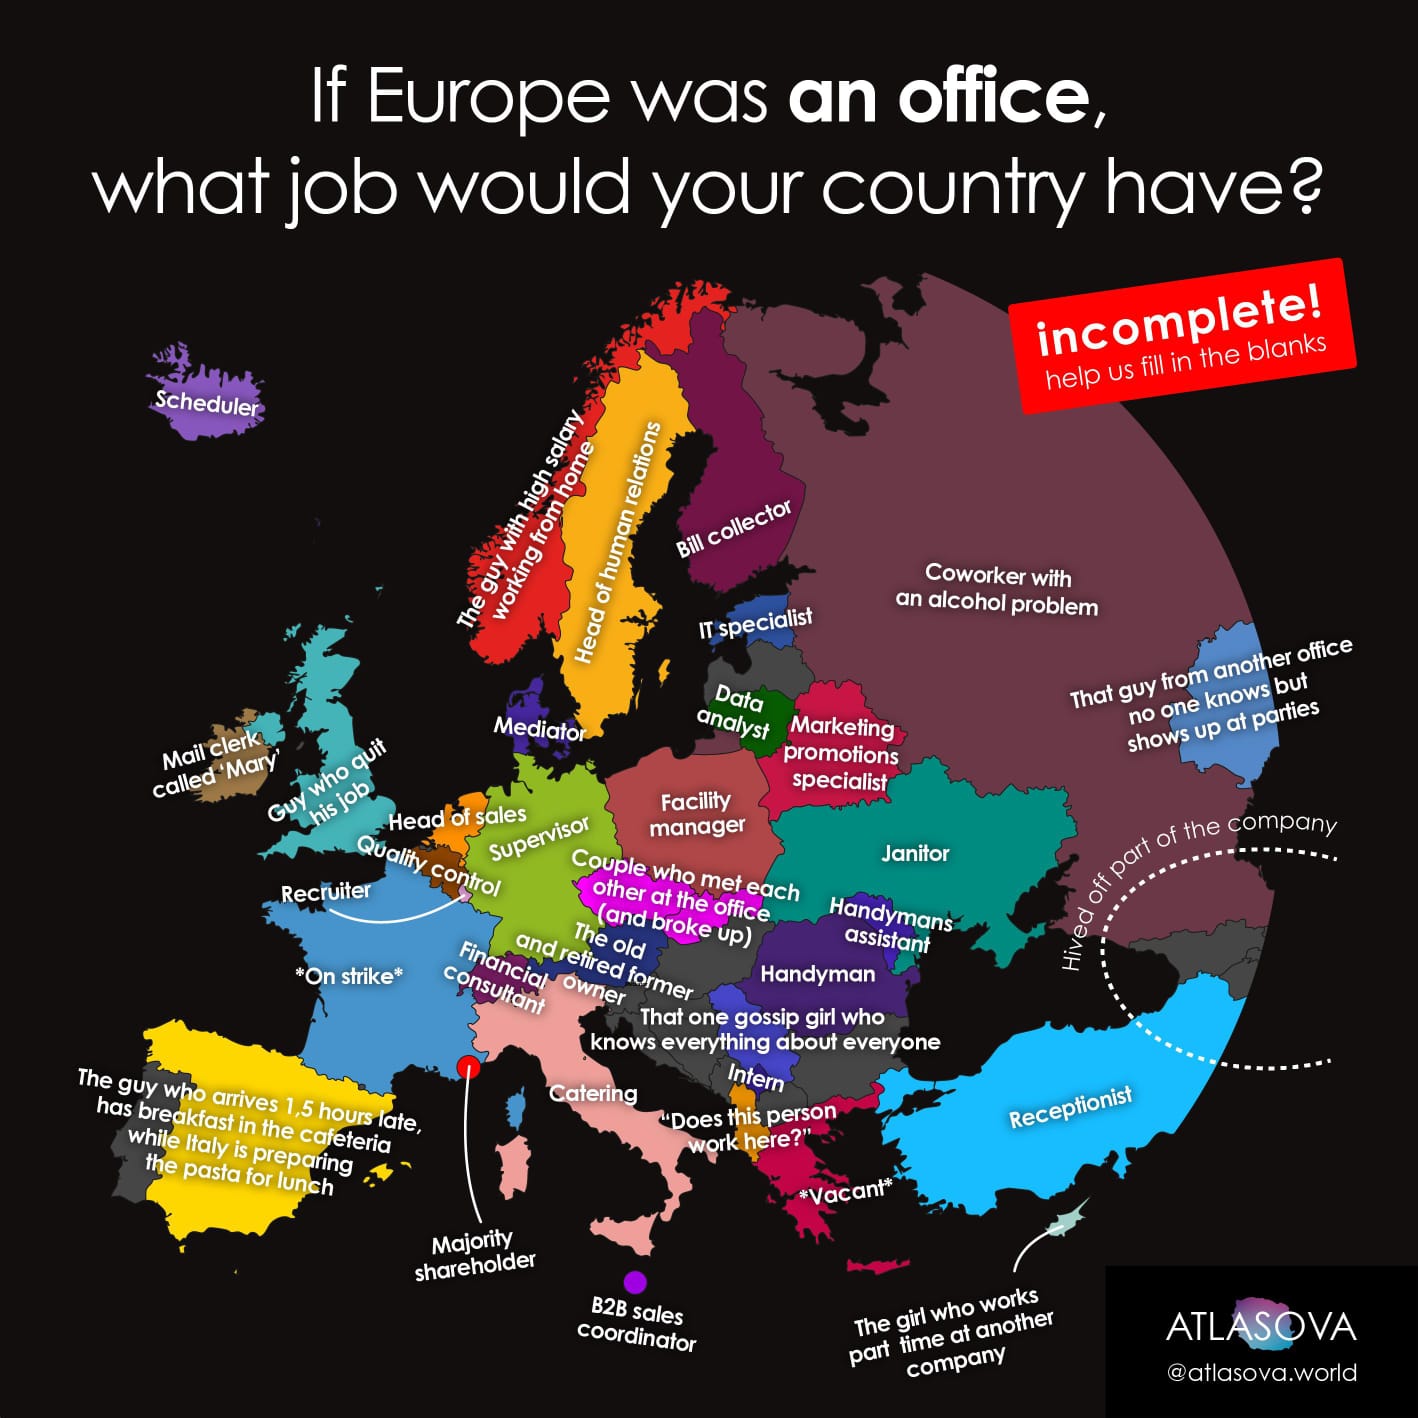 If Europe was an office